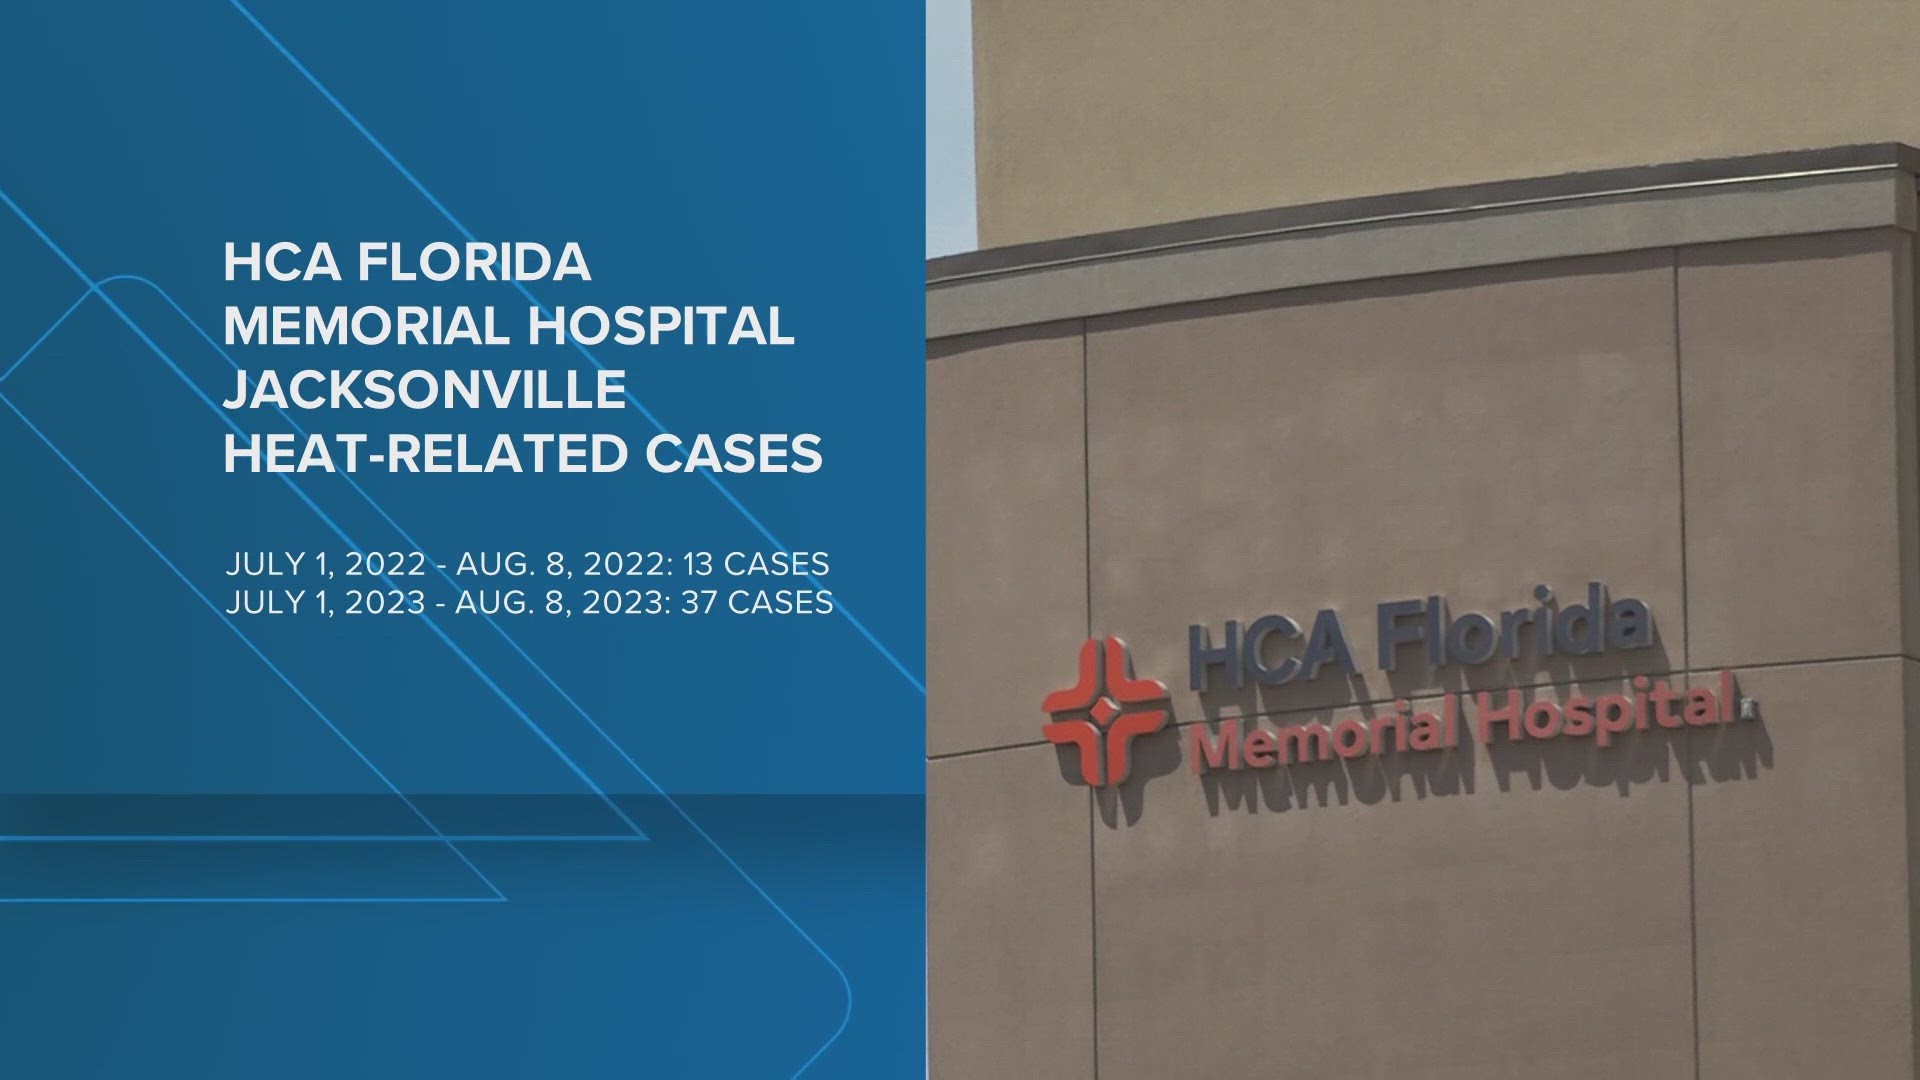 HCA Florida Memorial Hospital in Jacksonville has seen 37 patients for heat-related illnesses in the last six weeks.